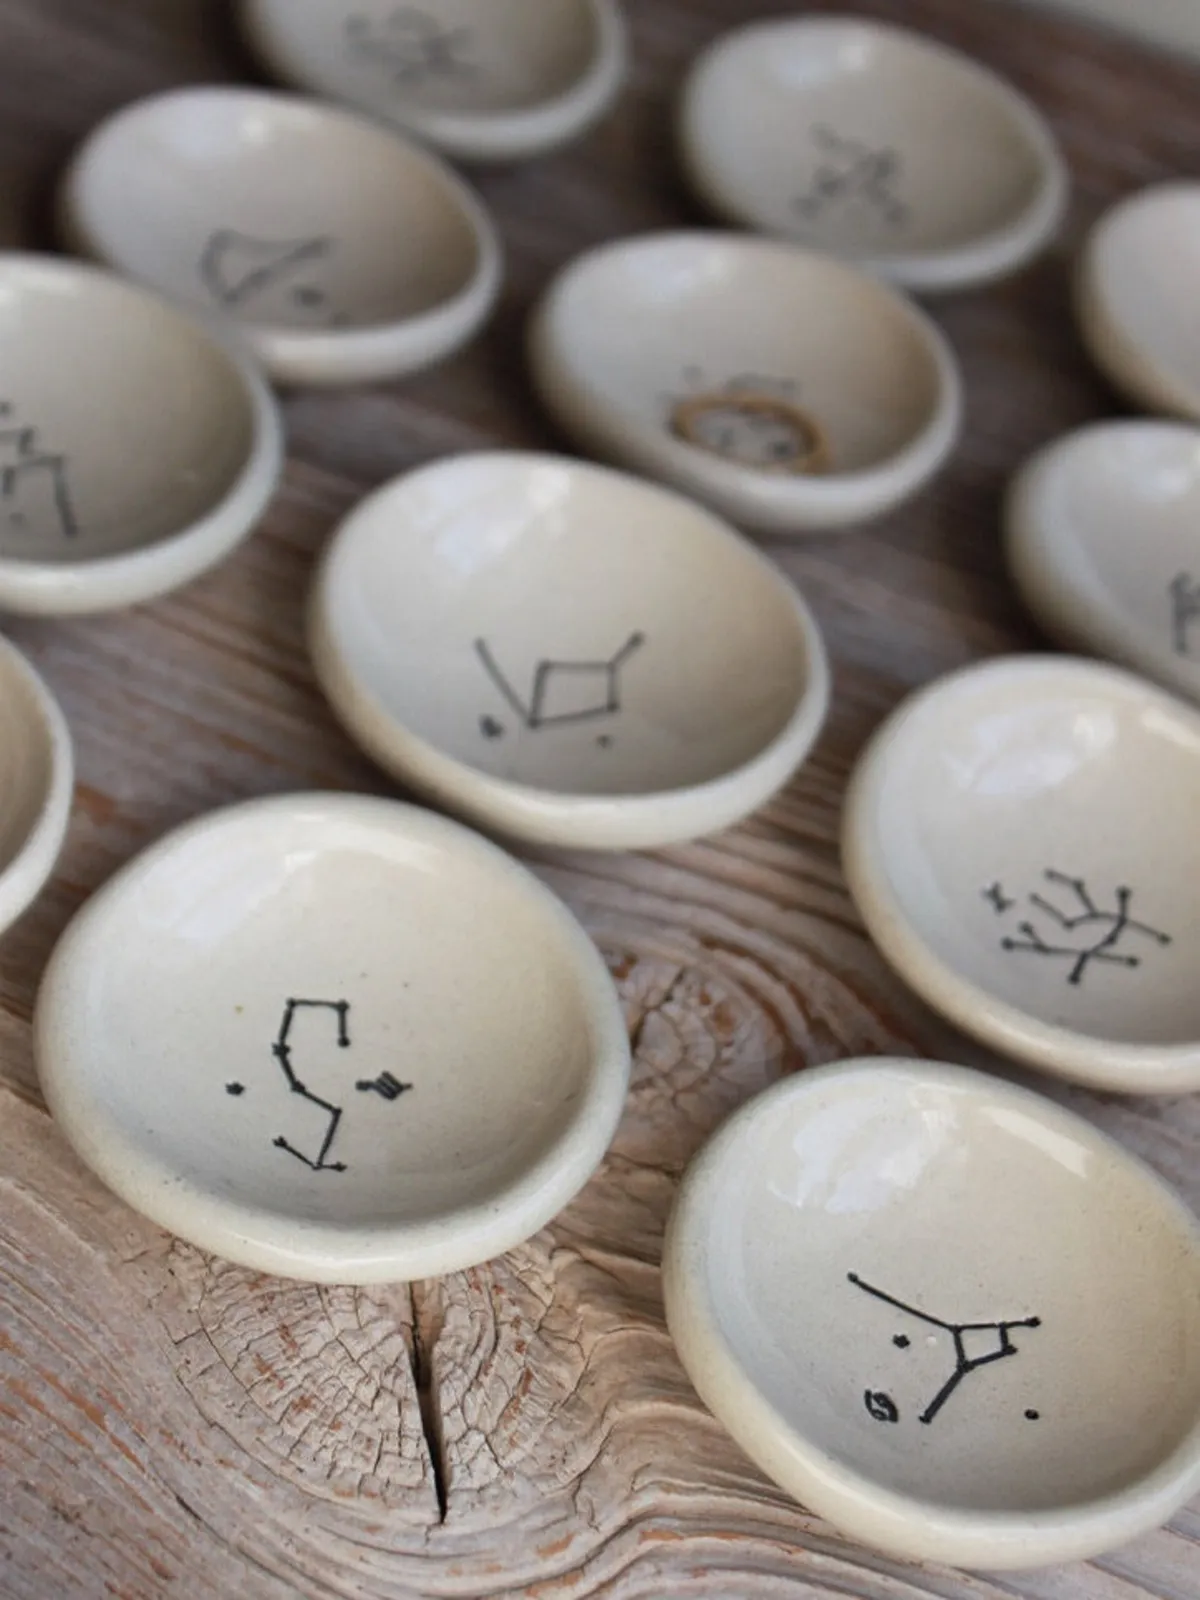 Constellation pottery painting ideas